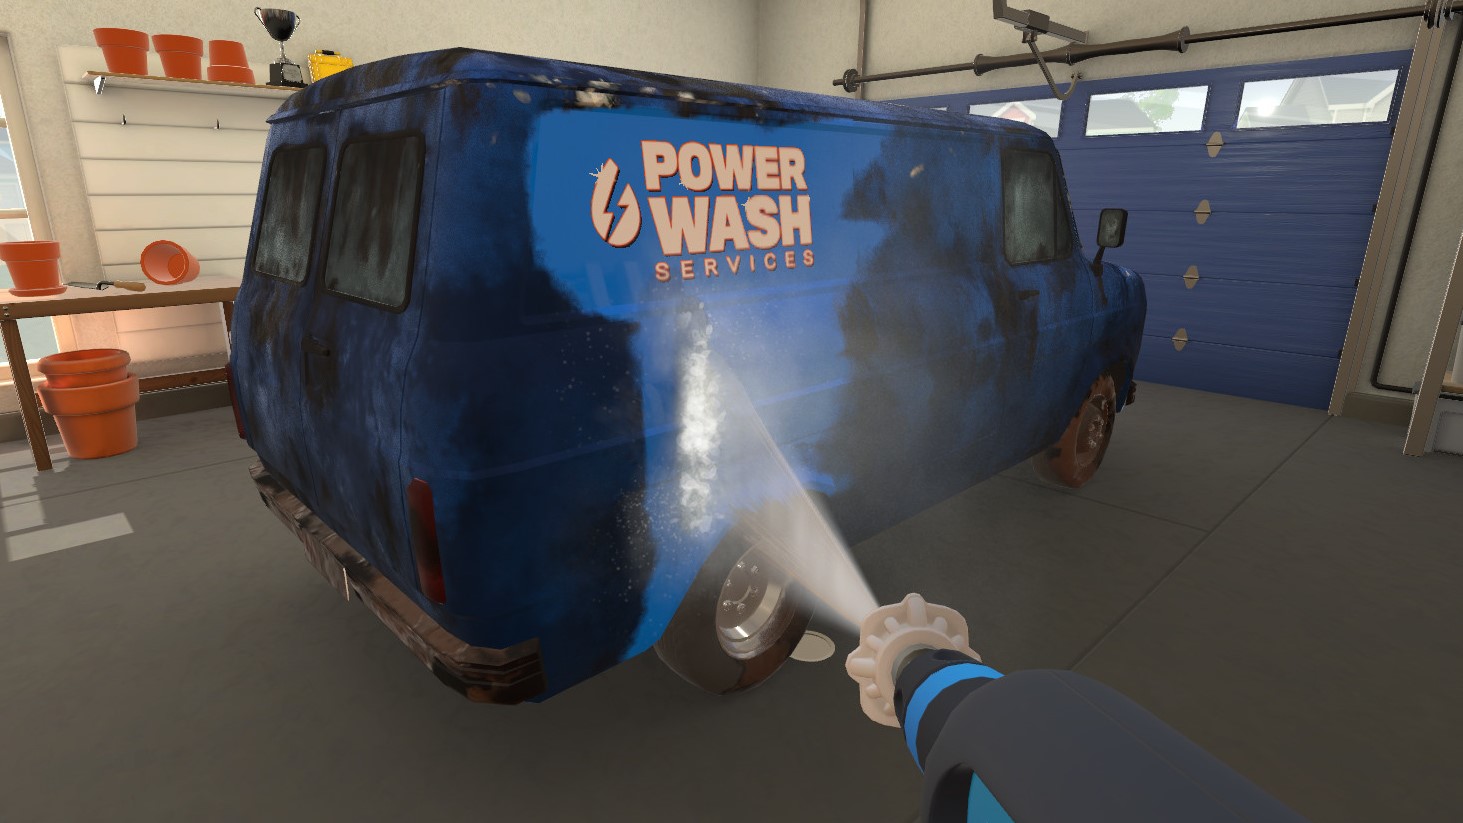 PowerWash Simulator's next free content update is out now